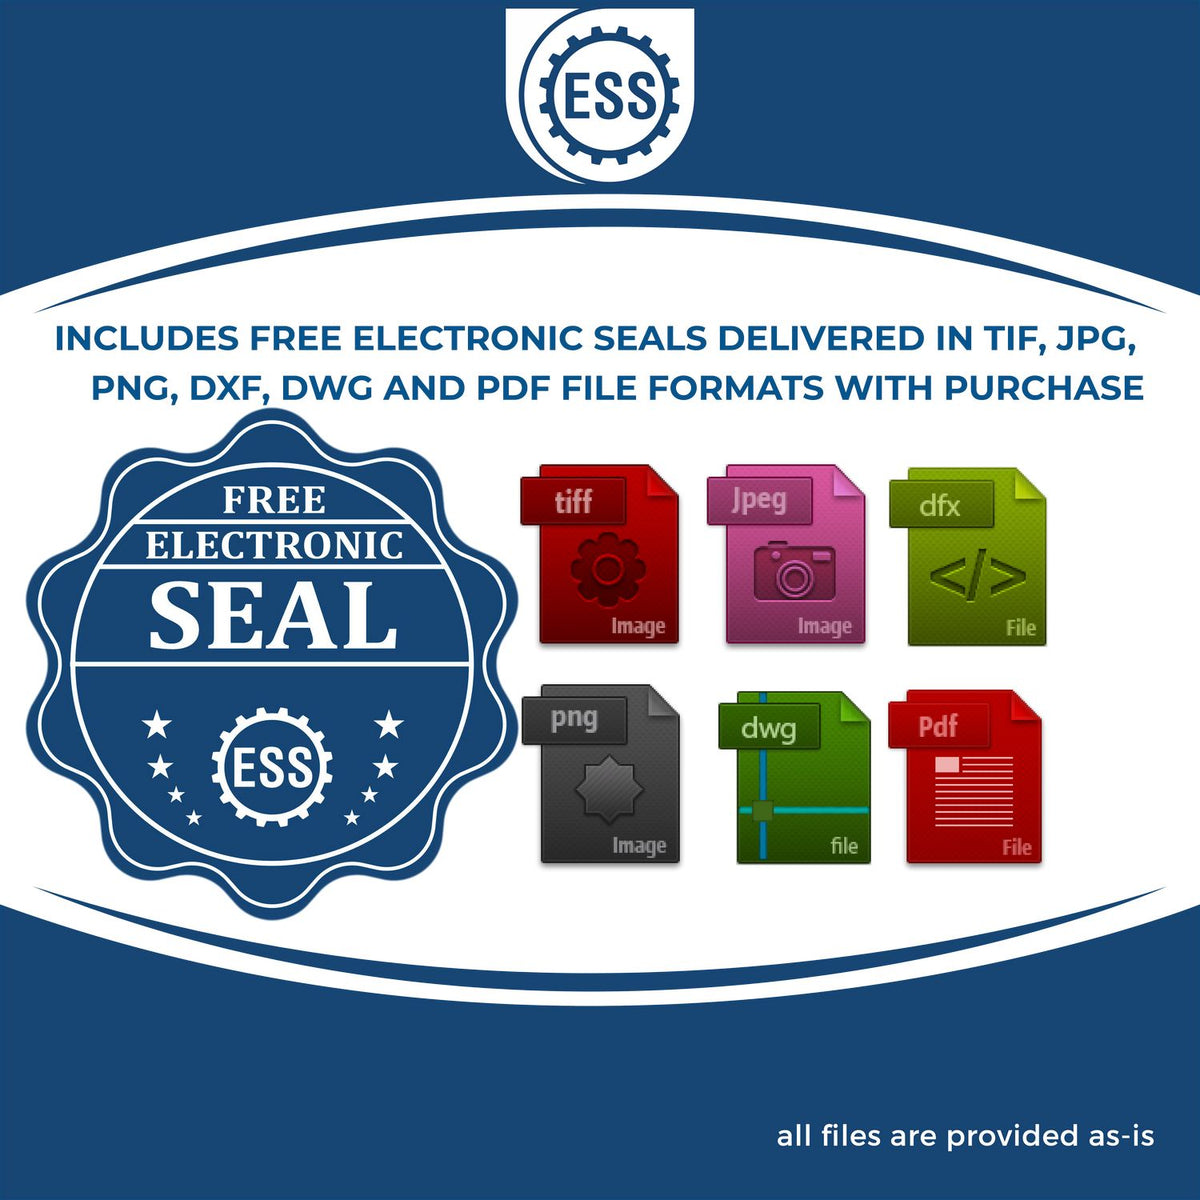 An infographic for the free electronic seal for the MaxLight Premium Pre-Inked Oregon Rectangular Notarial Stamp illustrating the different file type icons such as DXF, DWG, TIF, JPG and PNG.